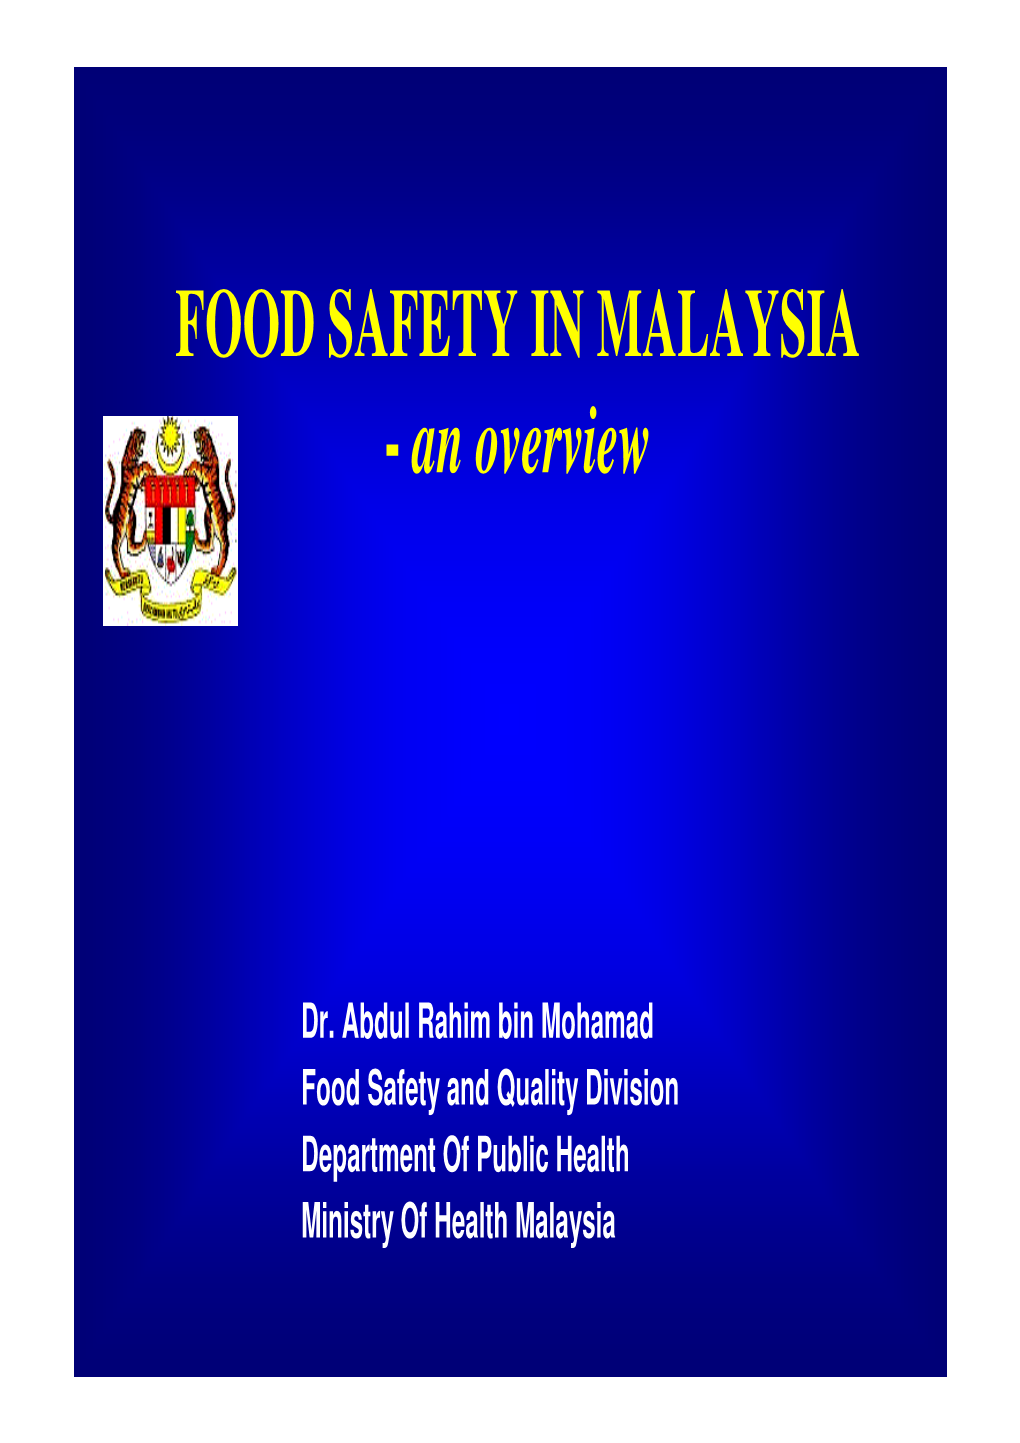 FOOD SAFETY in MALAYSIA - an Overview